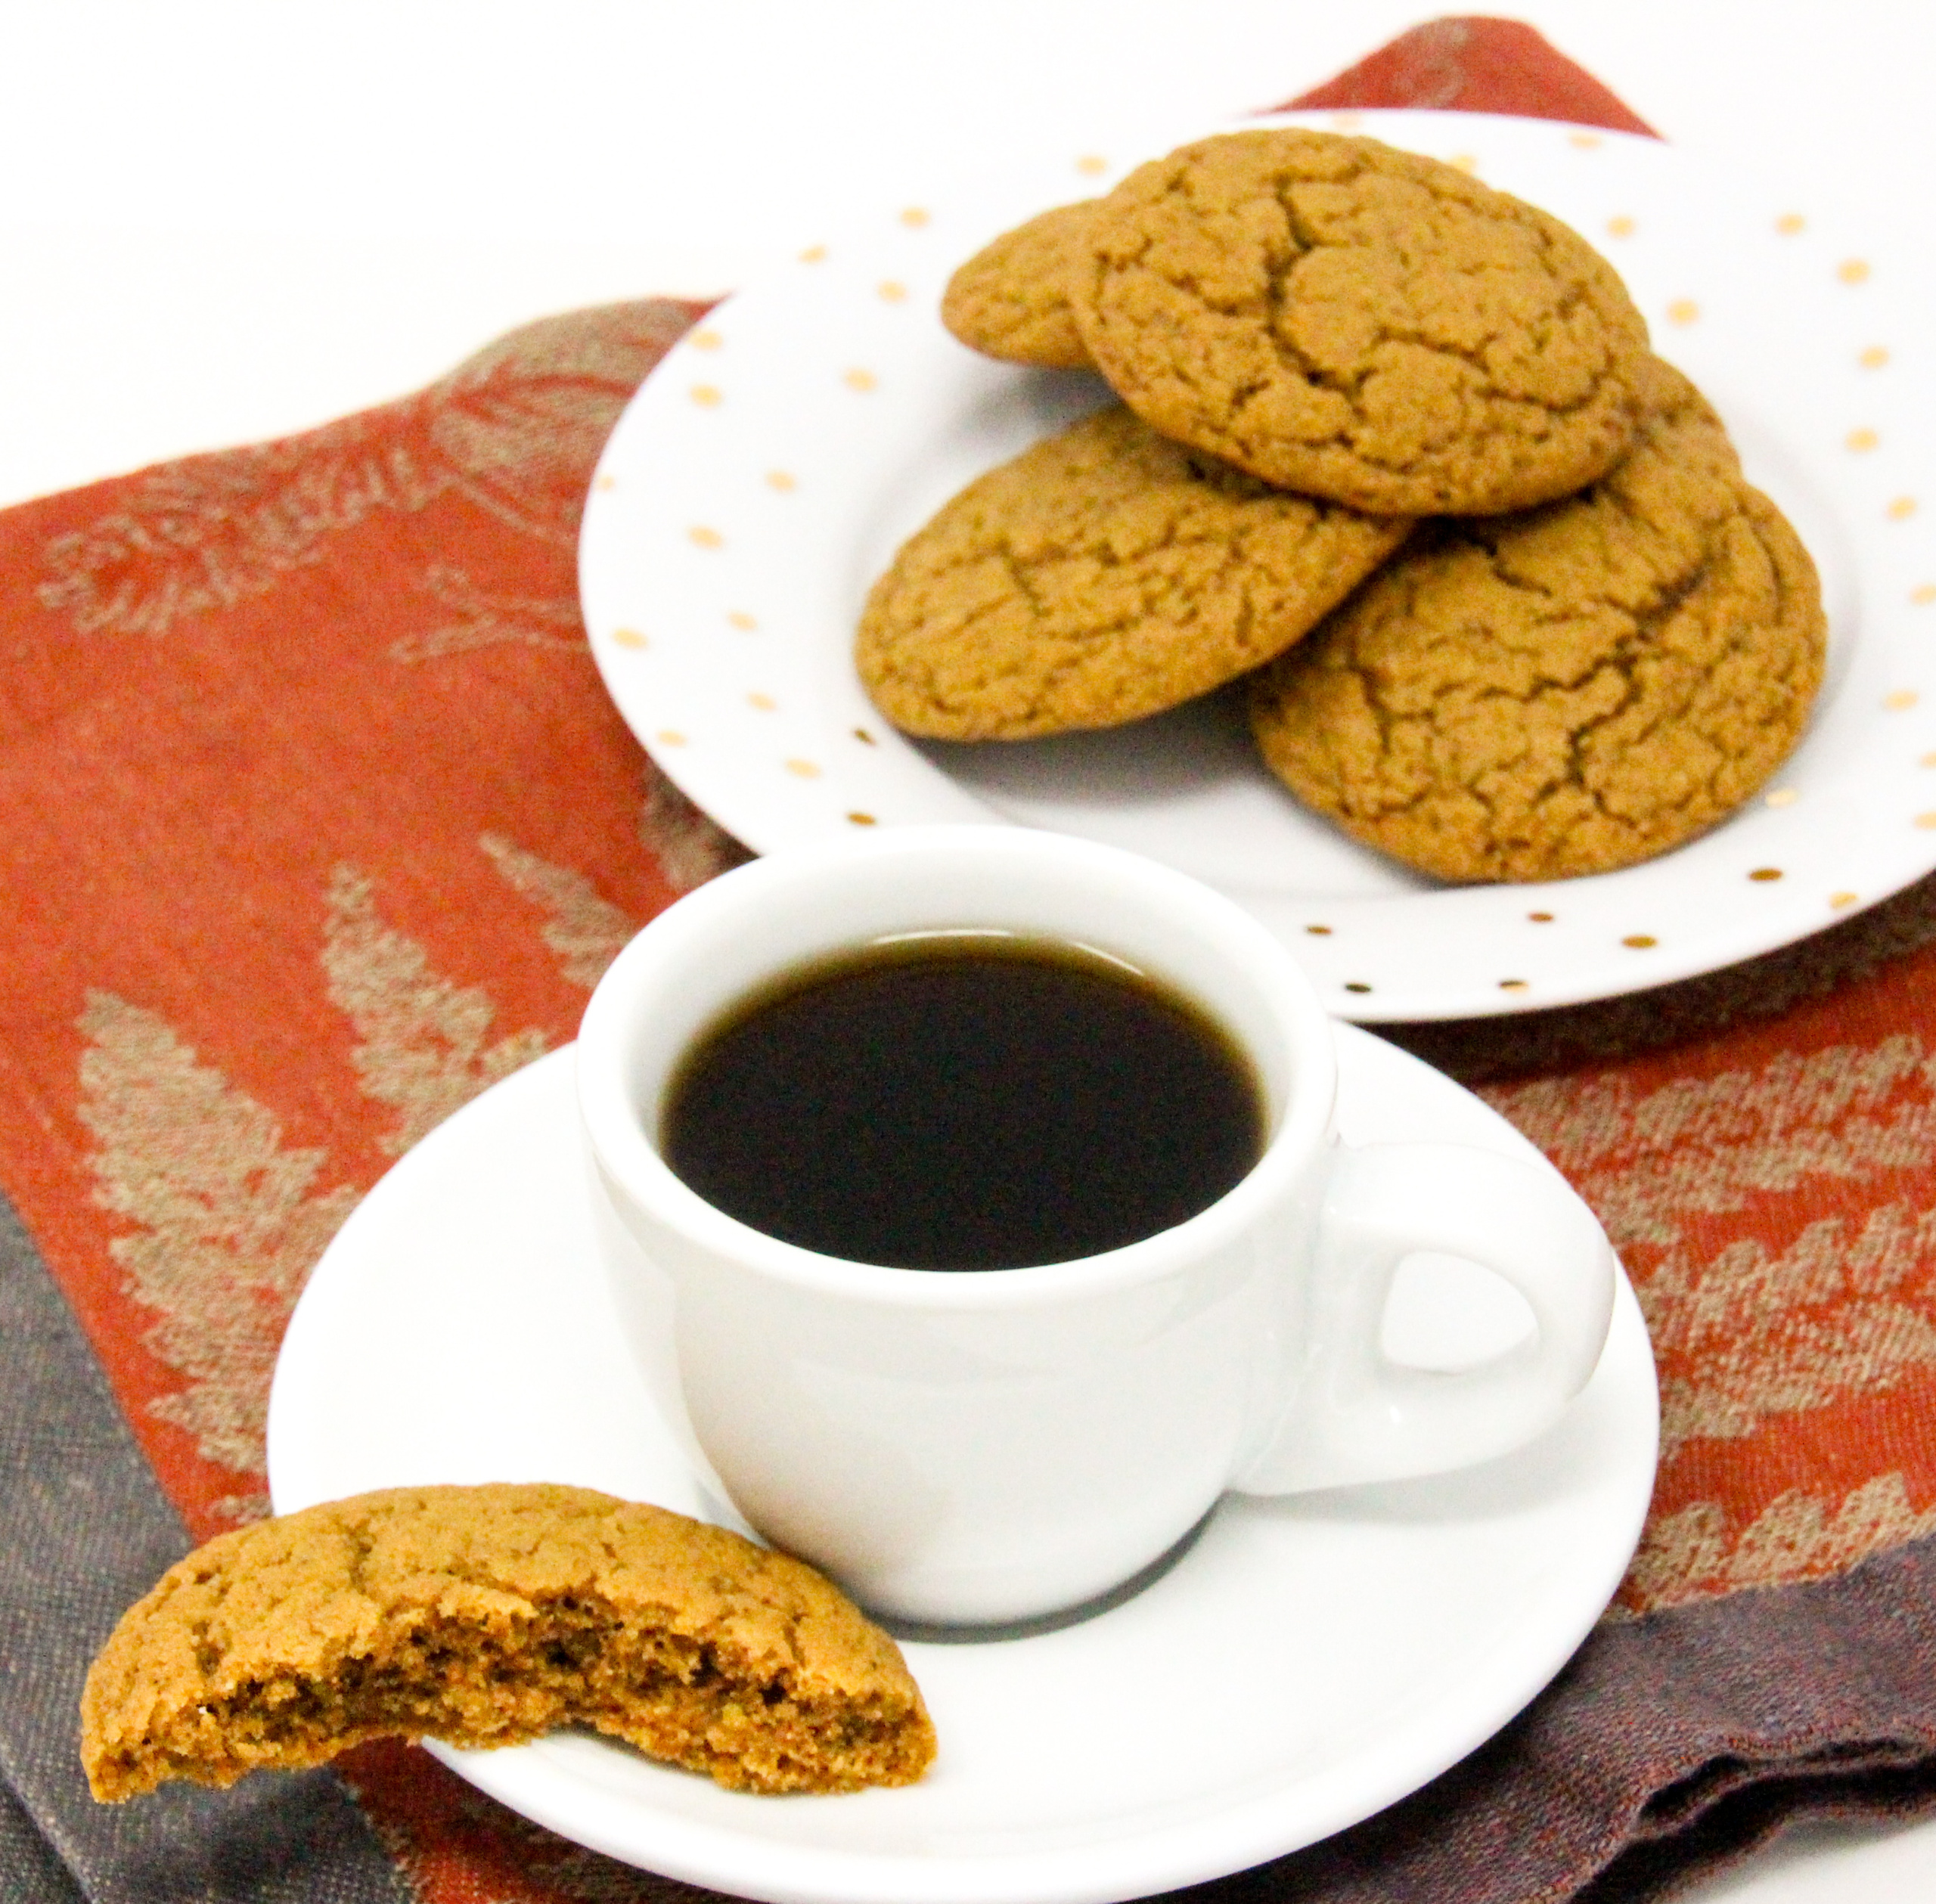 Coffee Crunch Cookies are a bit chewy on the inside and crunchy on the outside. The bitter, nutty taste of coffee is tempered by the caramel sweetness of brown sugar and a hint of cinnamon to round out the flavor. Recipe shared with permission granted by Daryl Wood Gerber, author of POACHING IS PUZZLING. 